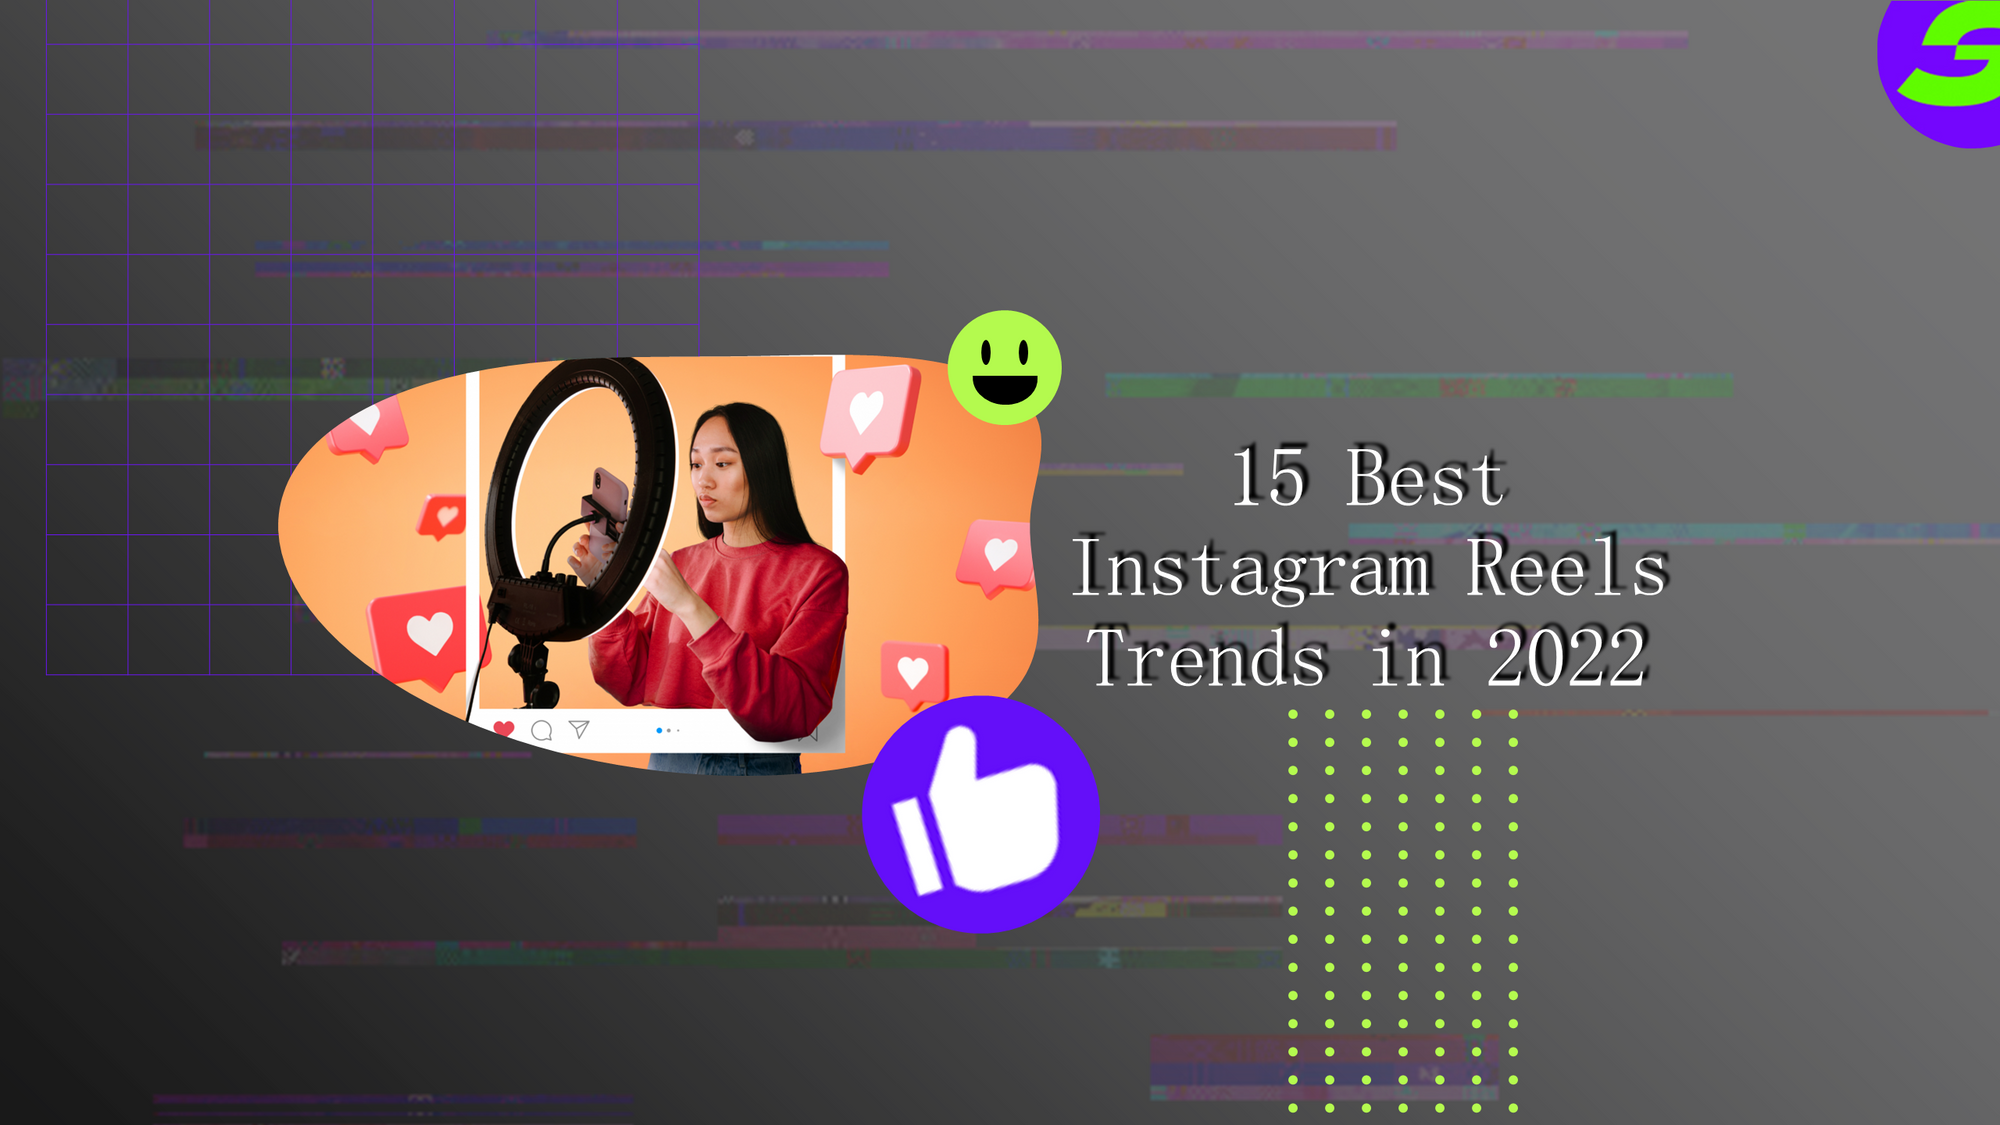 15 Latest Instagram Reels Trends in 2022 ShotCut free video editor for Android